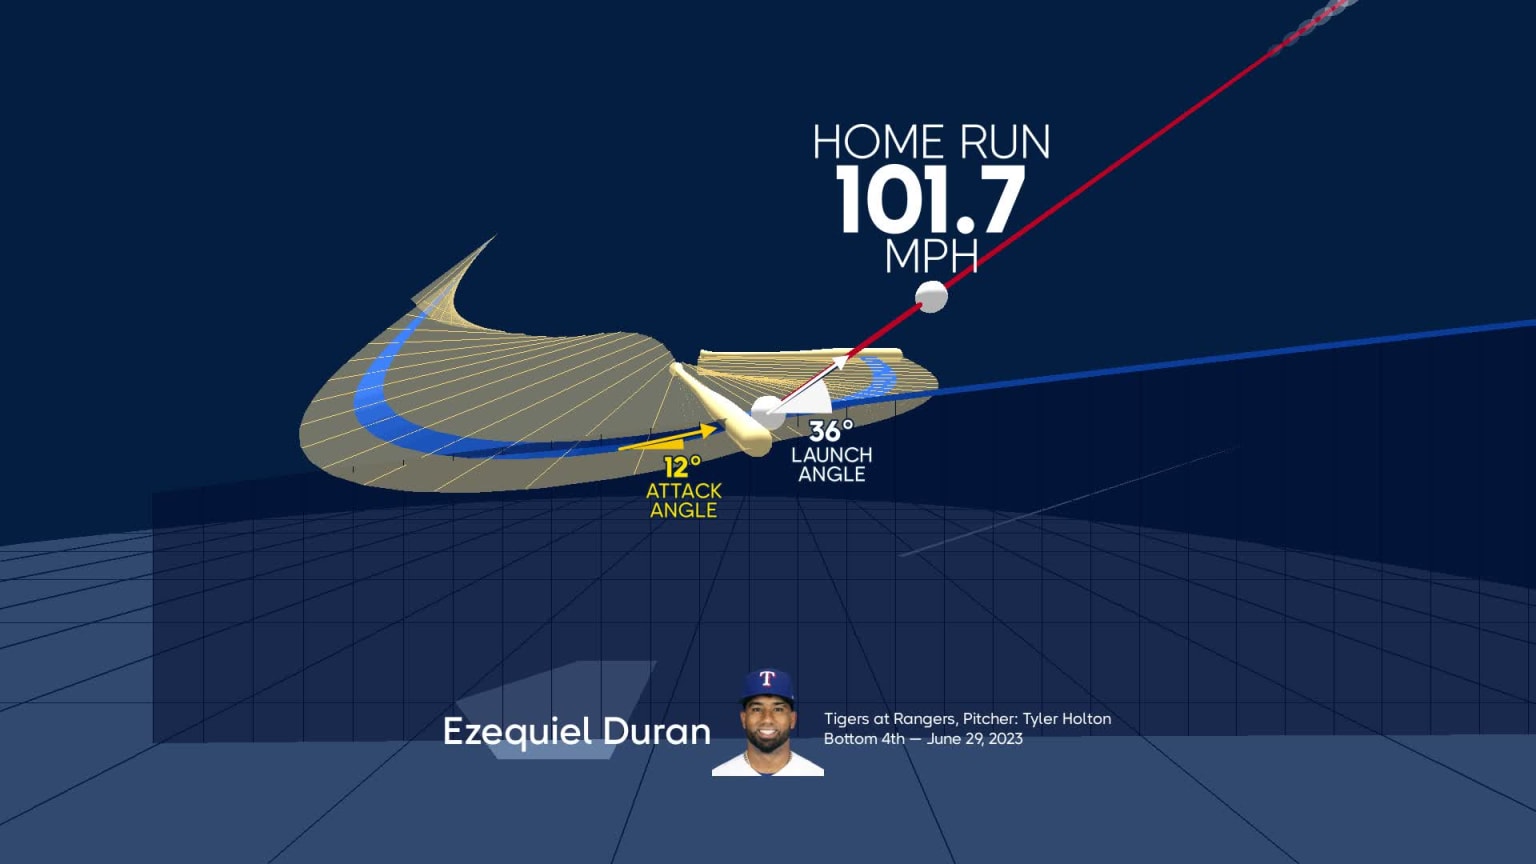 Yankees prospect Ezequiel Duran brings an impact bat to the system